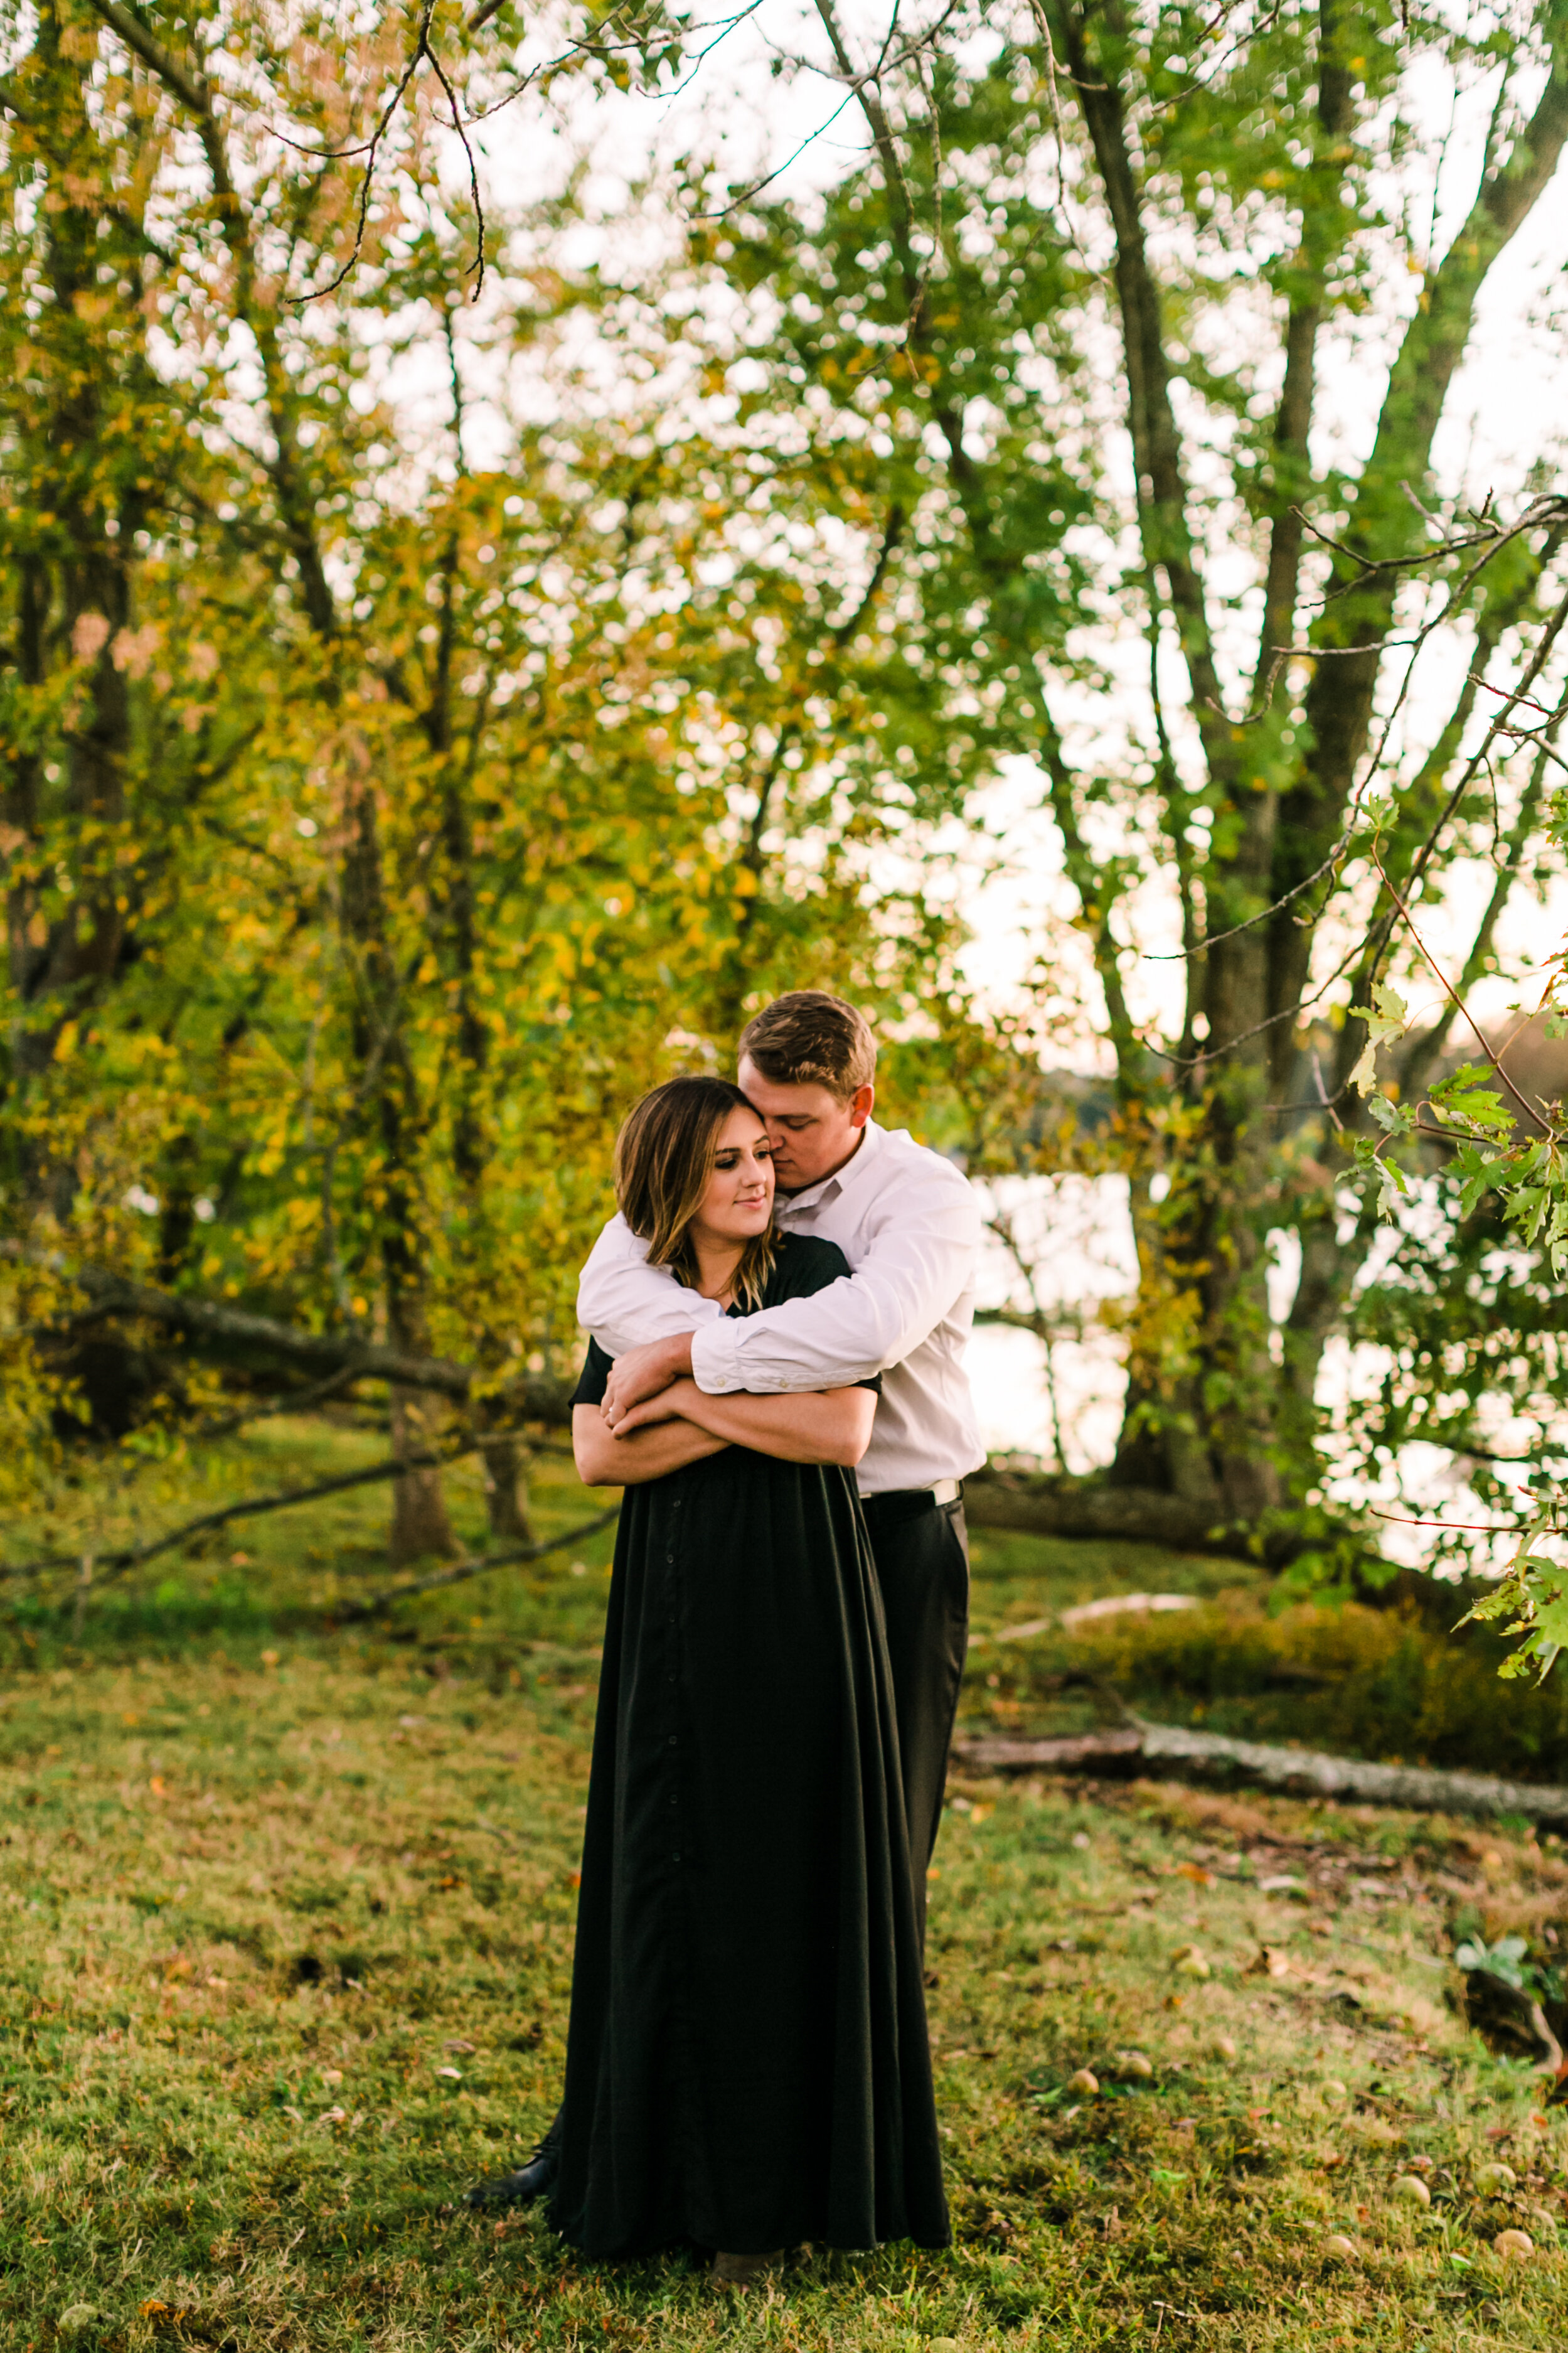 Tennessee+Fall+Engagement+Photos+Puppy (60 of 63).jpg